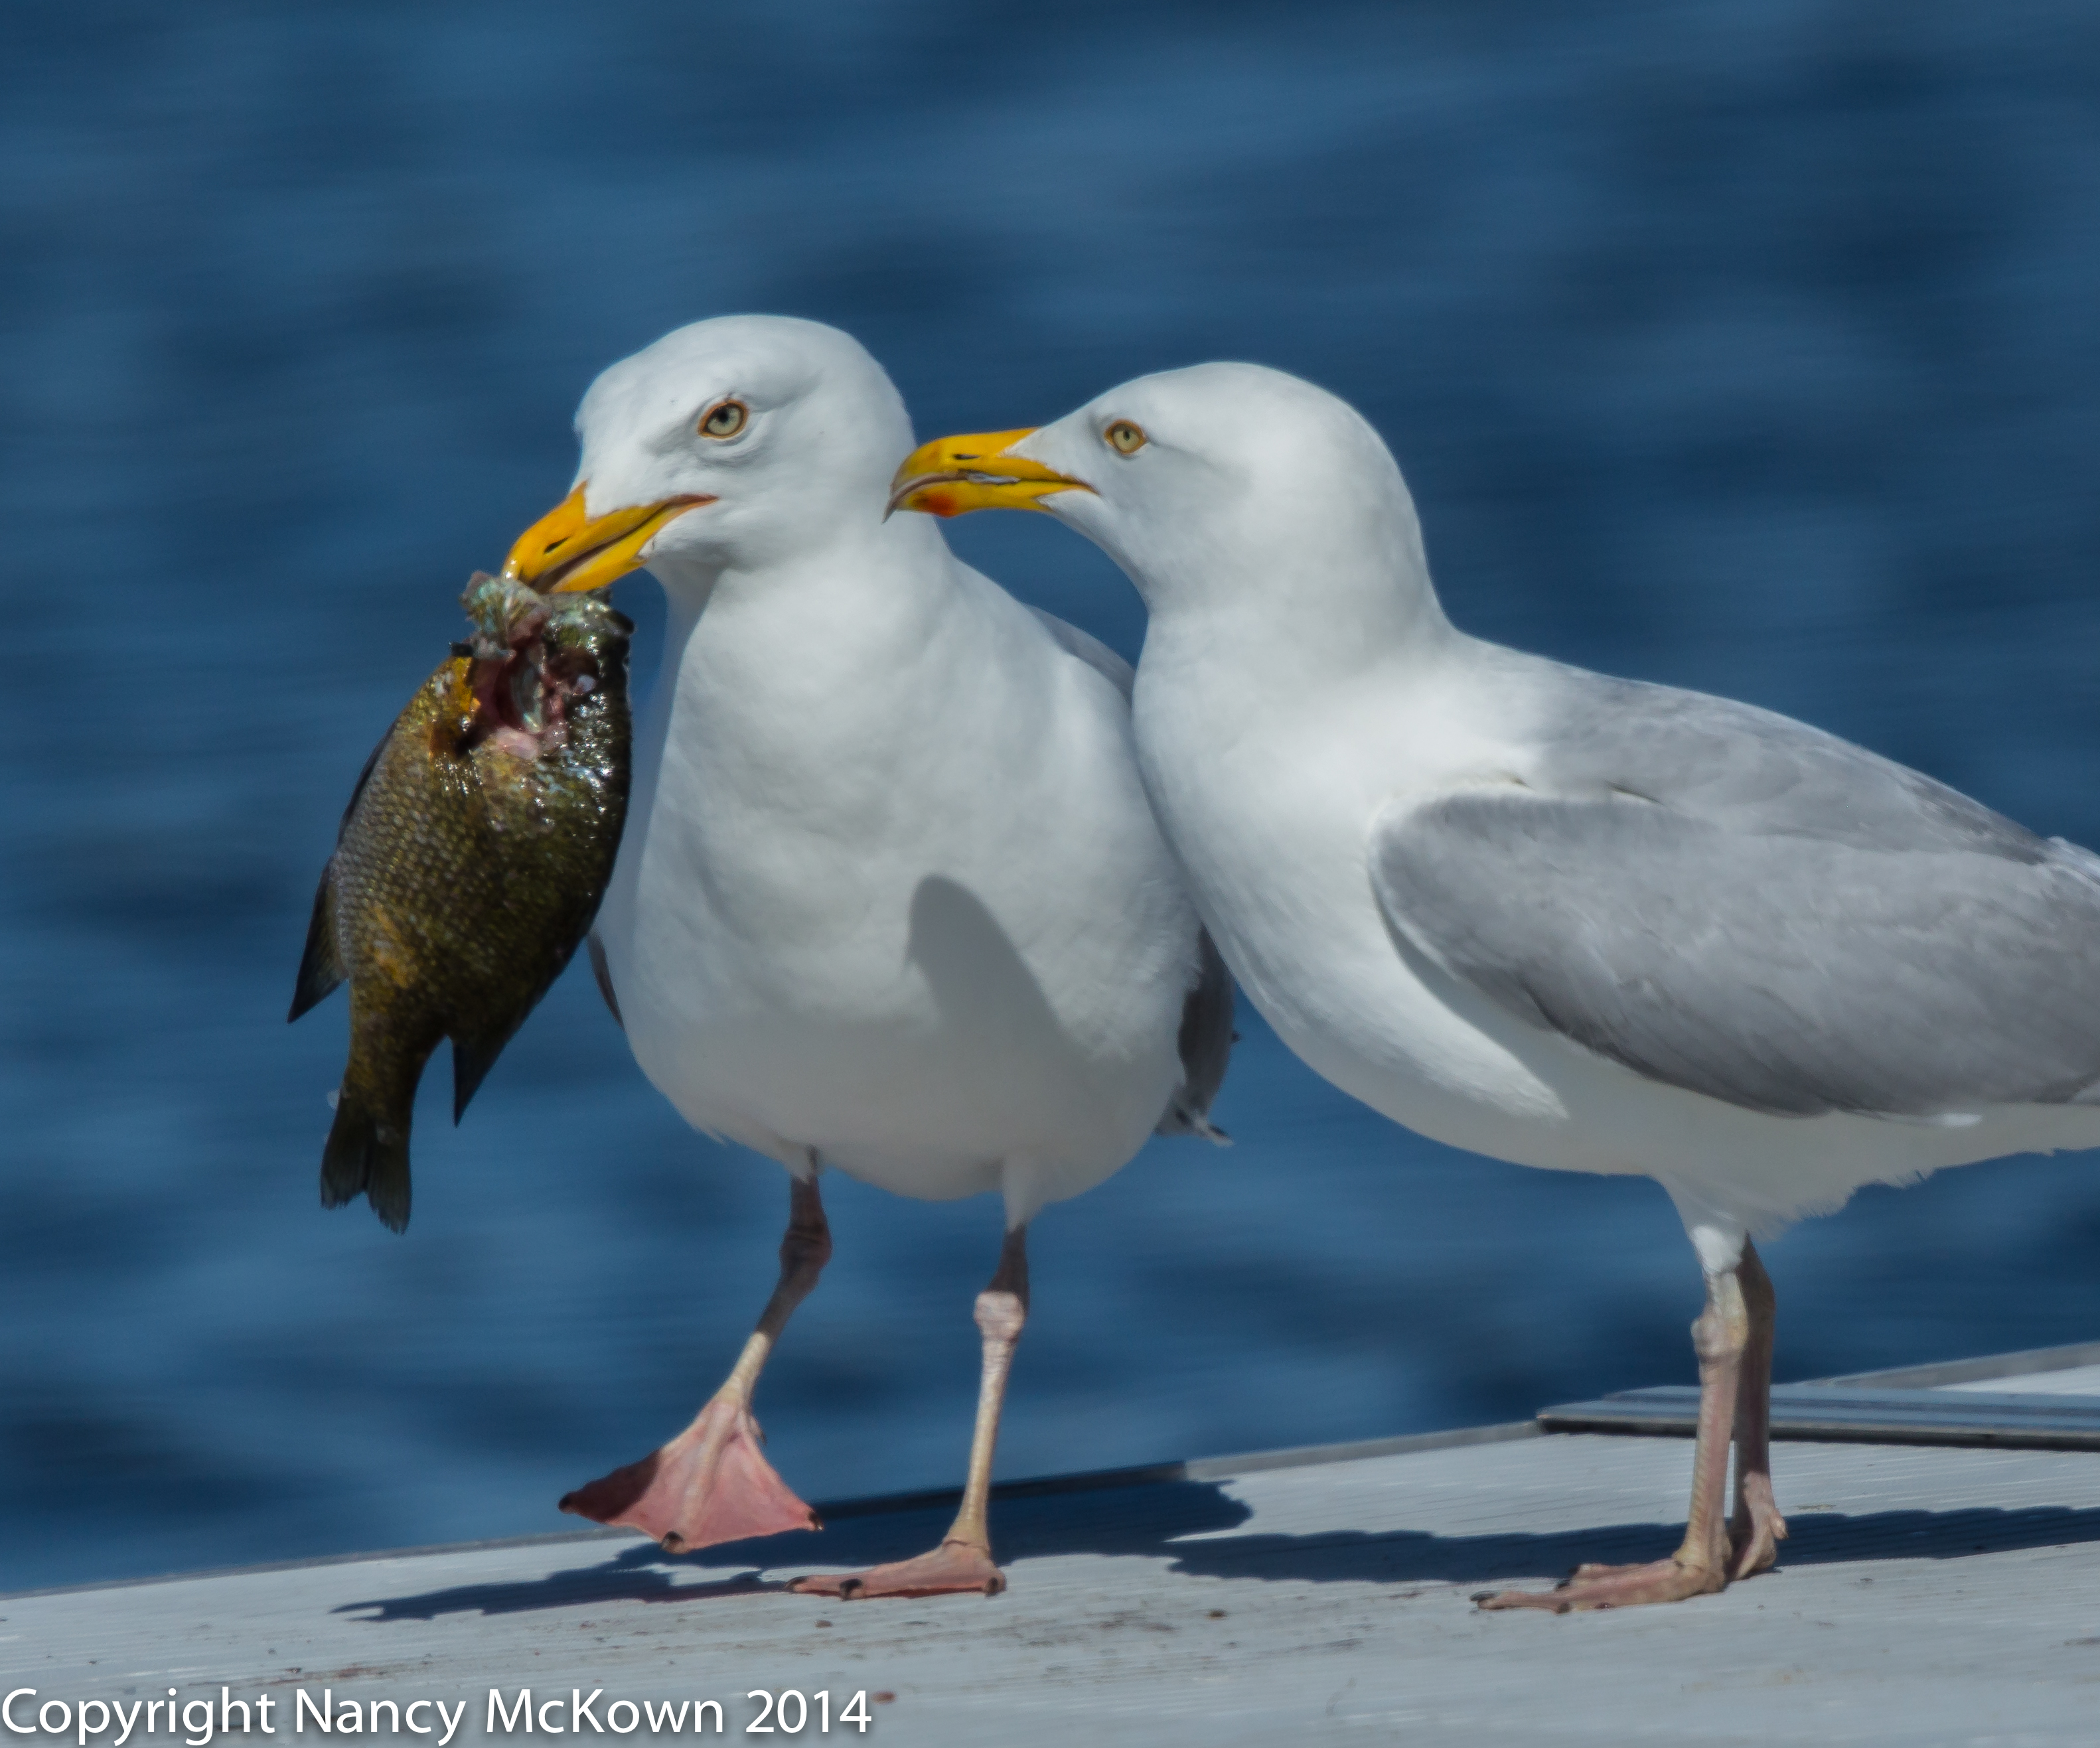 Photographing Herring Seagulls “Sharing” a Bluegill | Welcome to